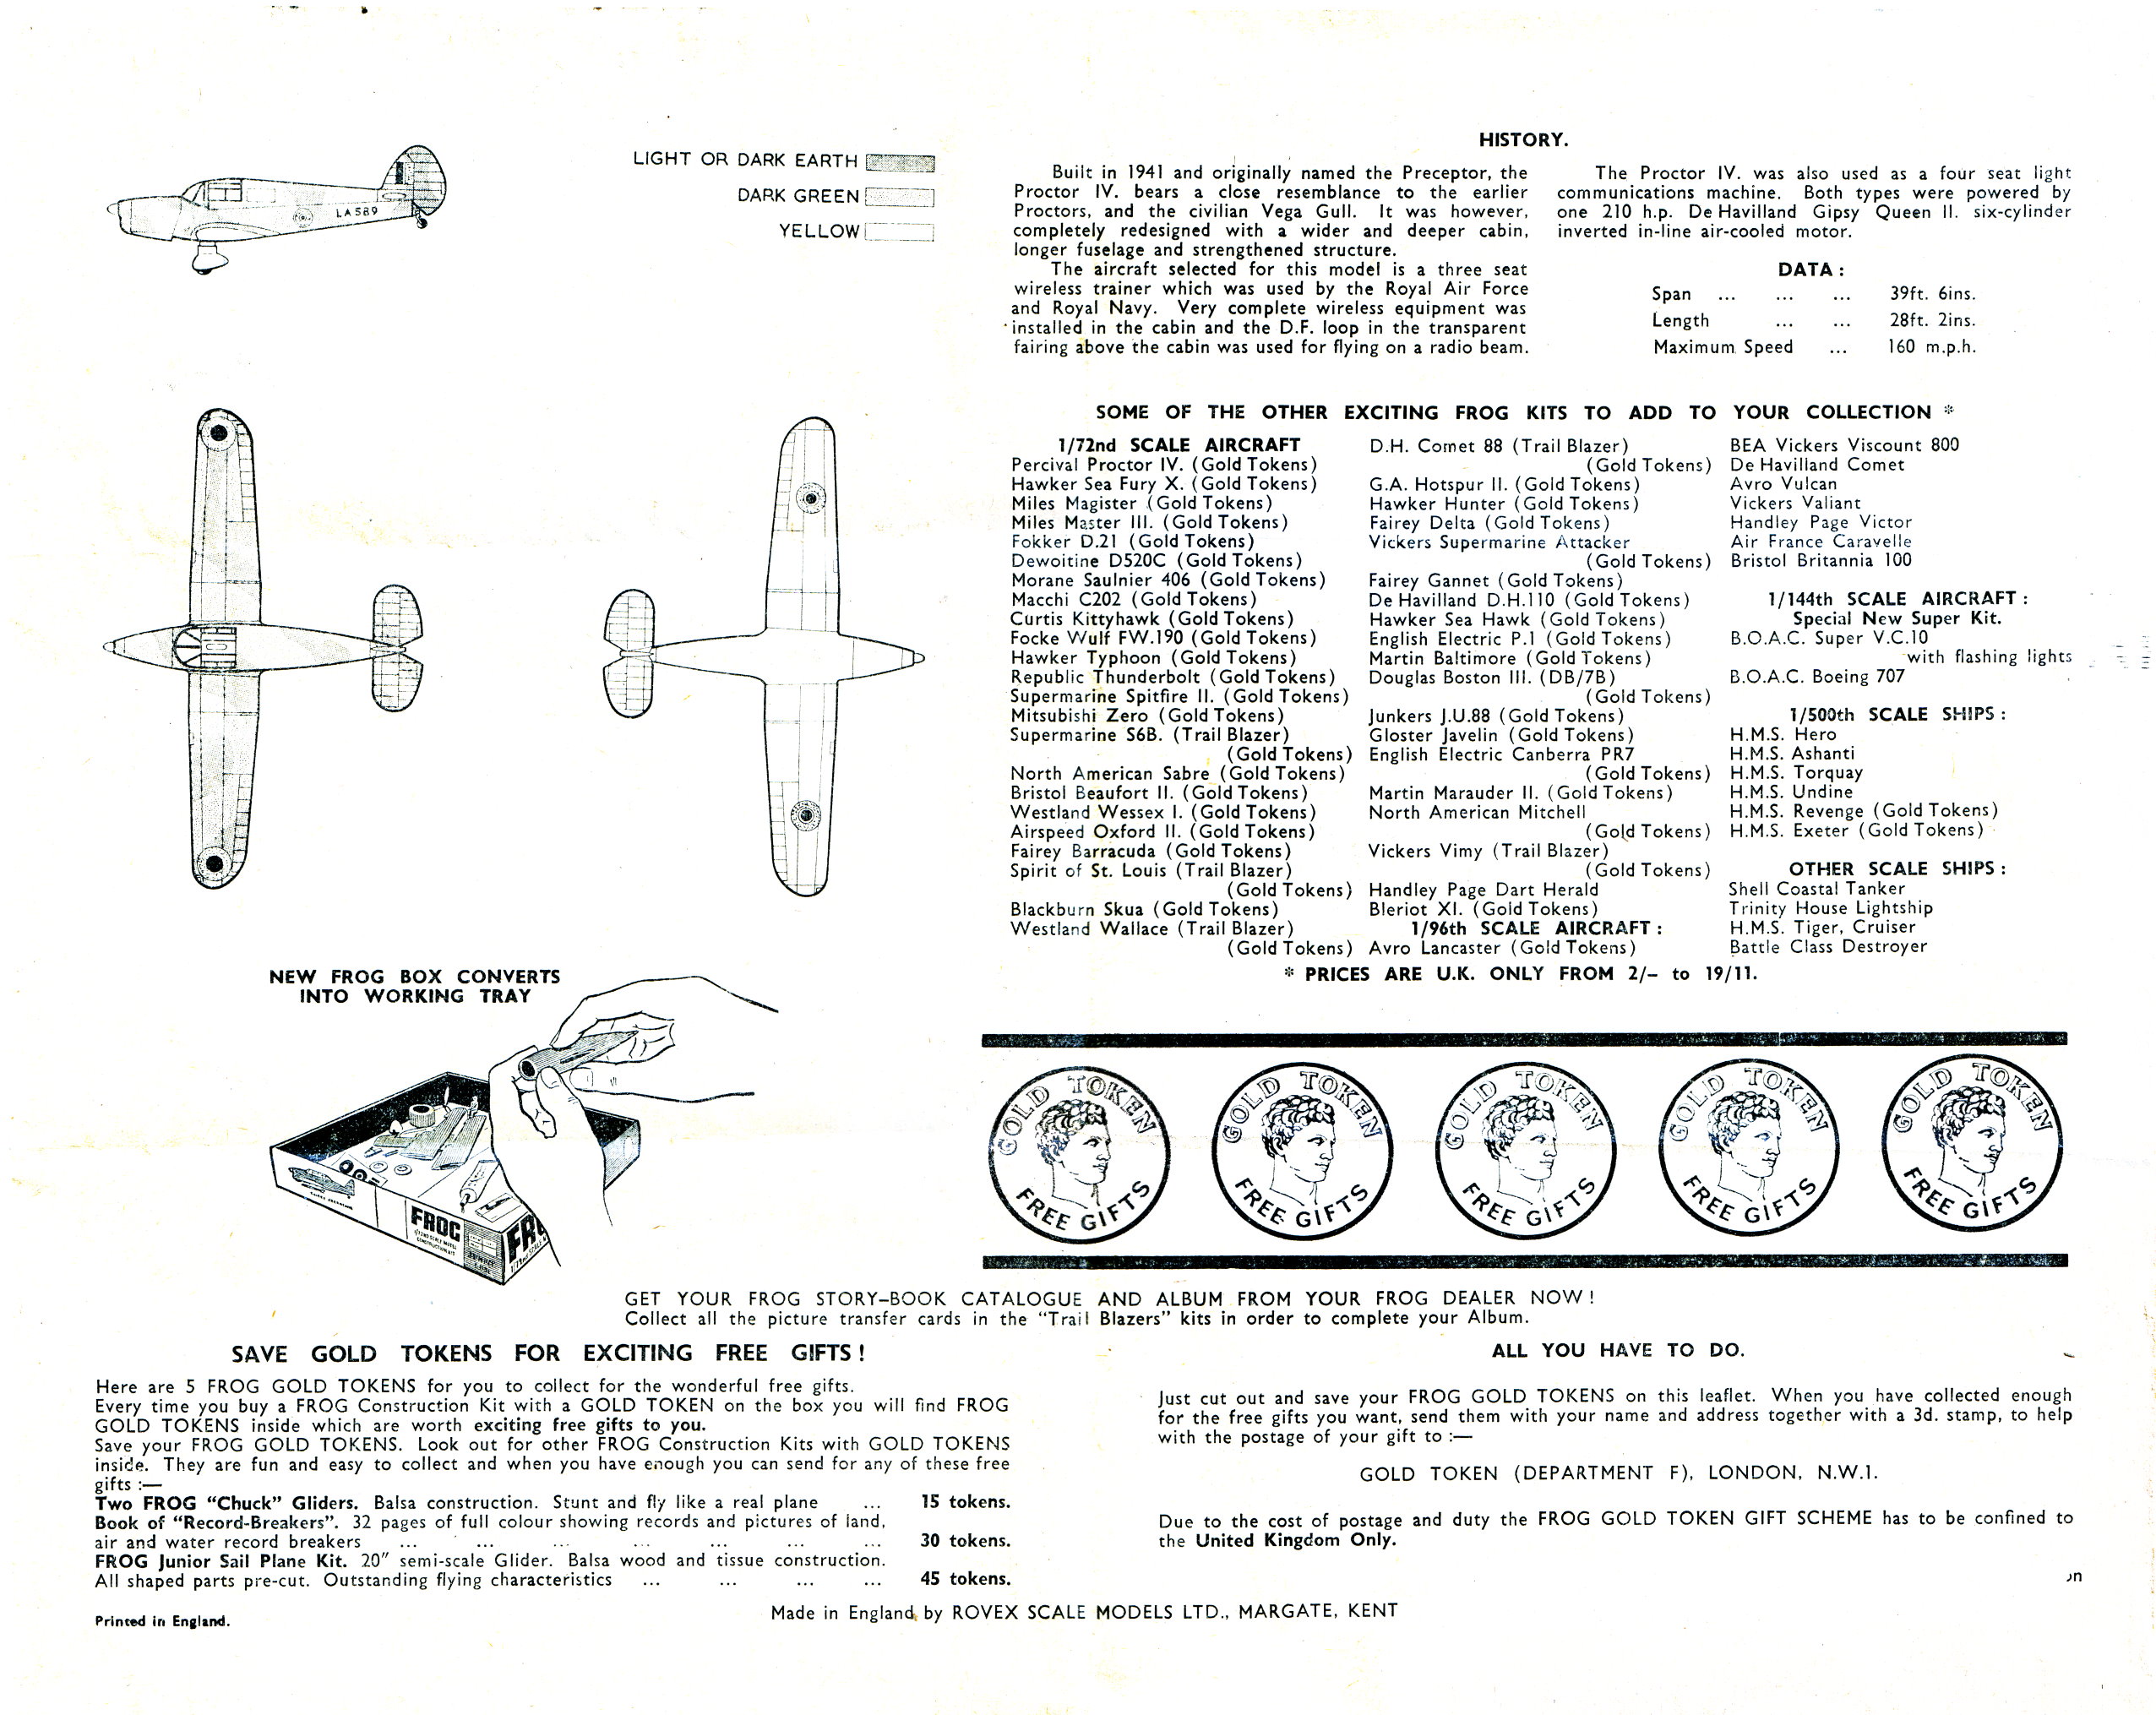 FROG F341 Percival Proctor IV Trainer, Black series with Gold Tokens, IMA Ltd 1965, painting guide